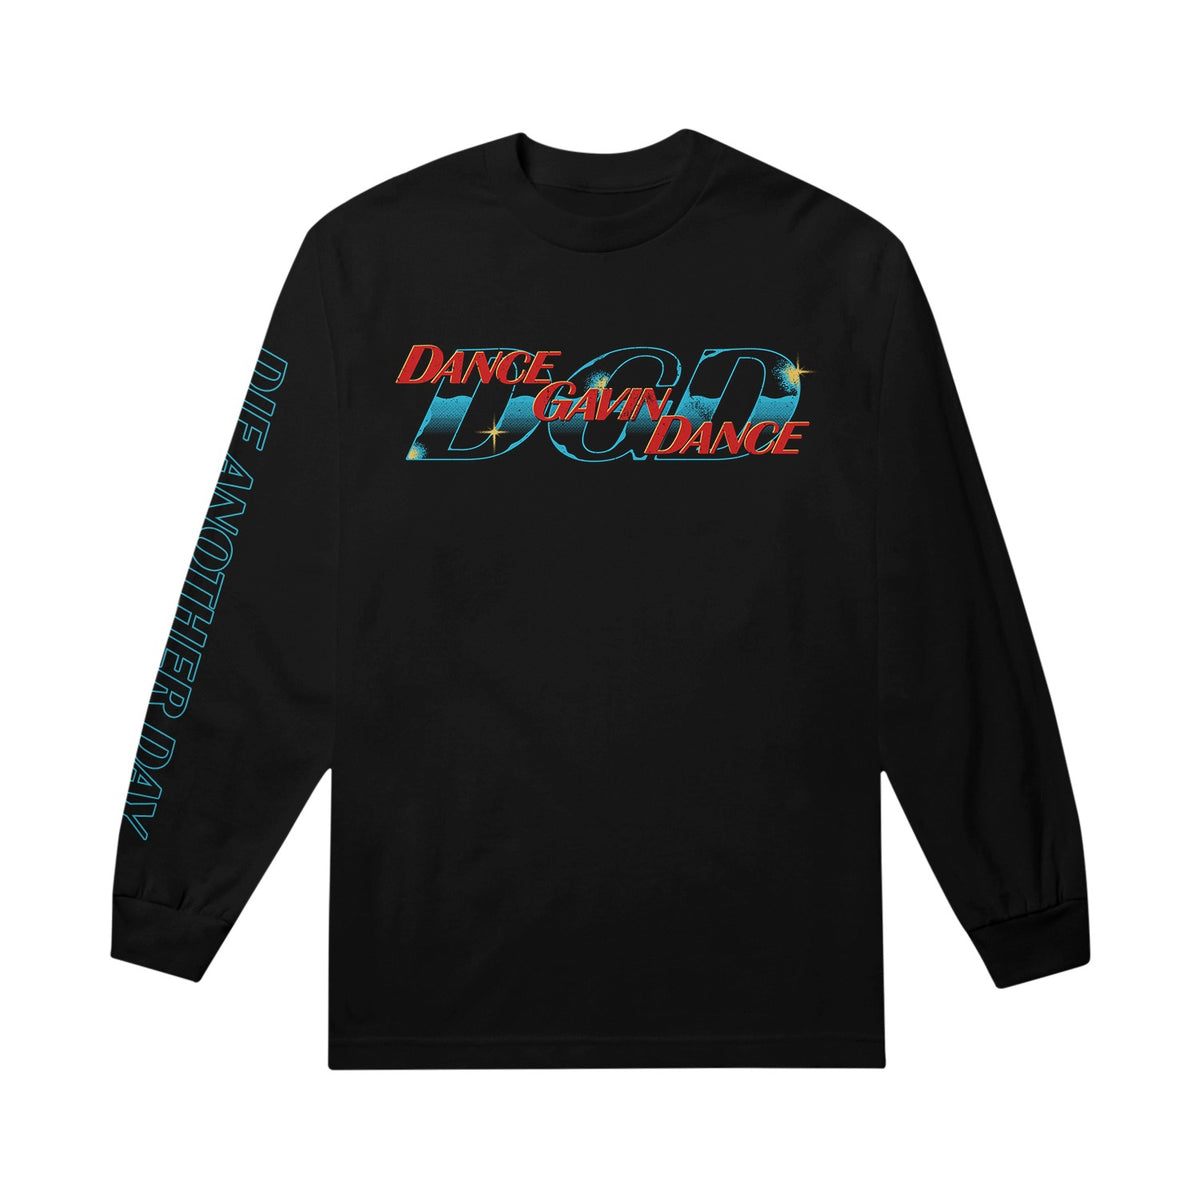 Die Another Day Black - Long Sleeve